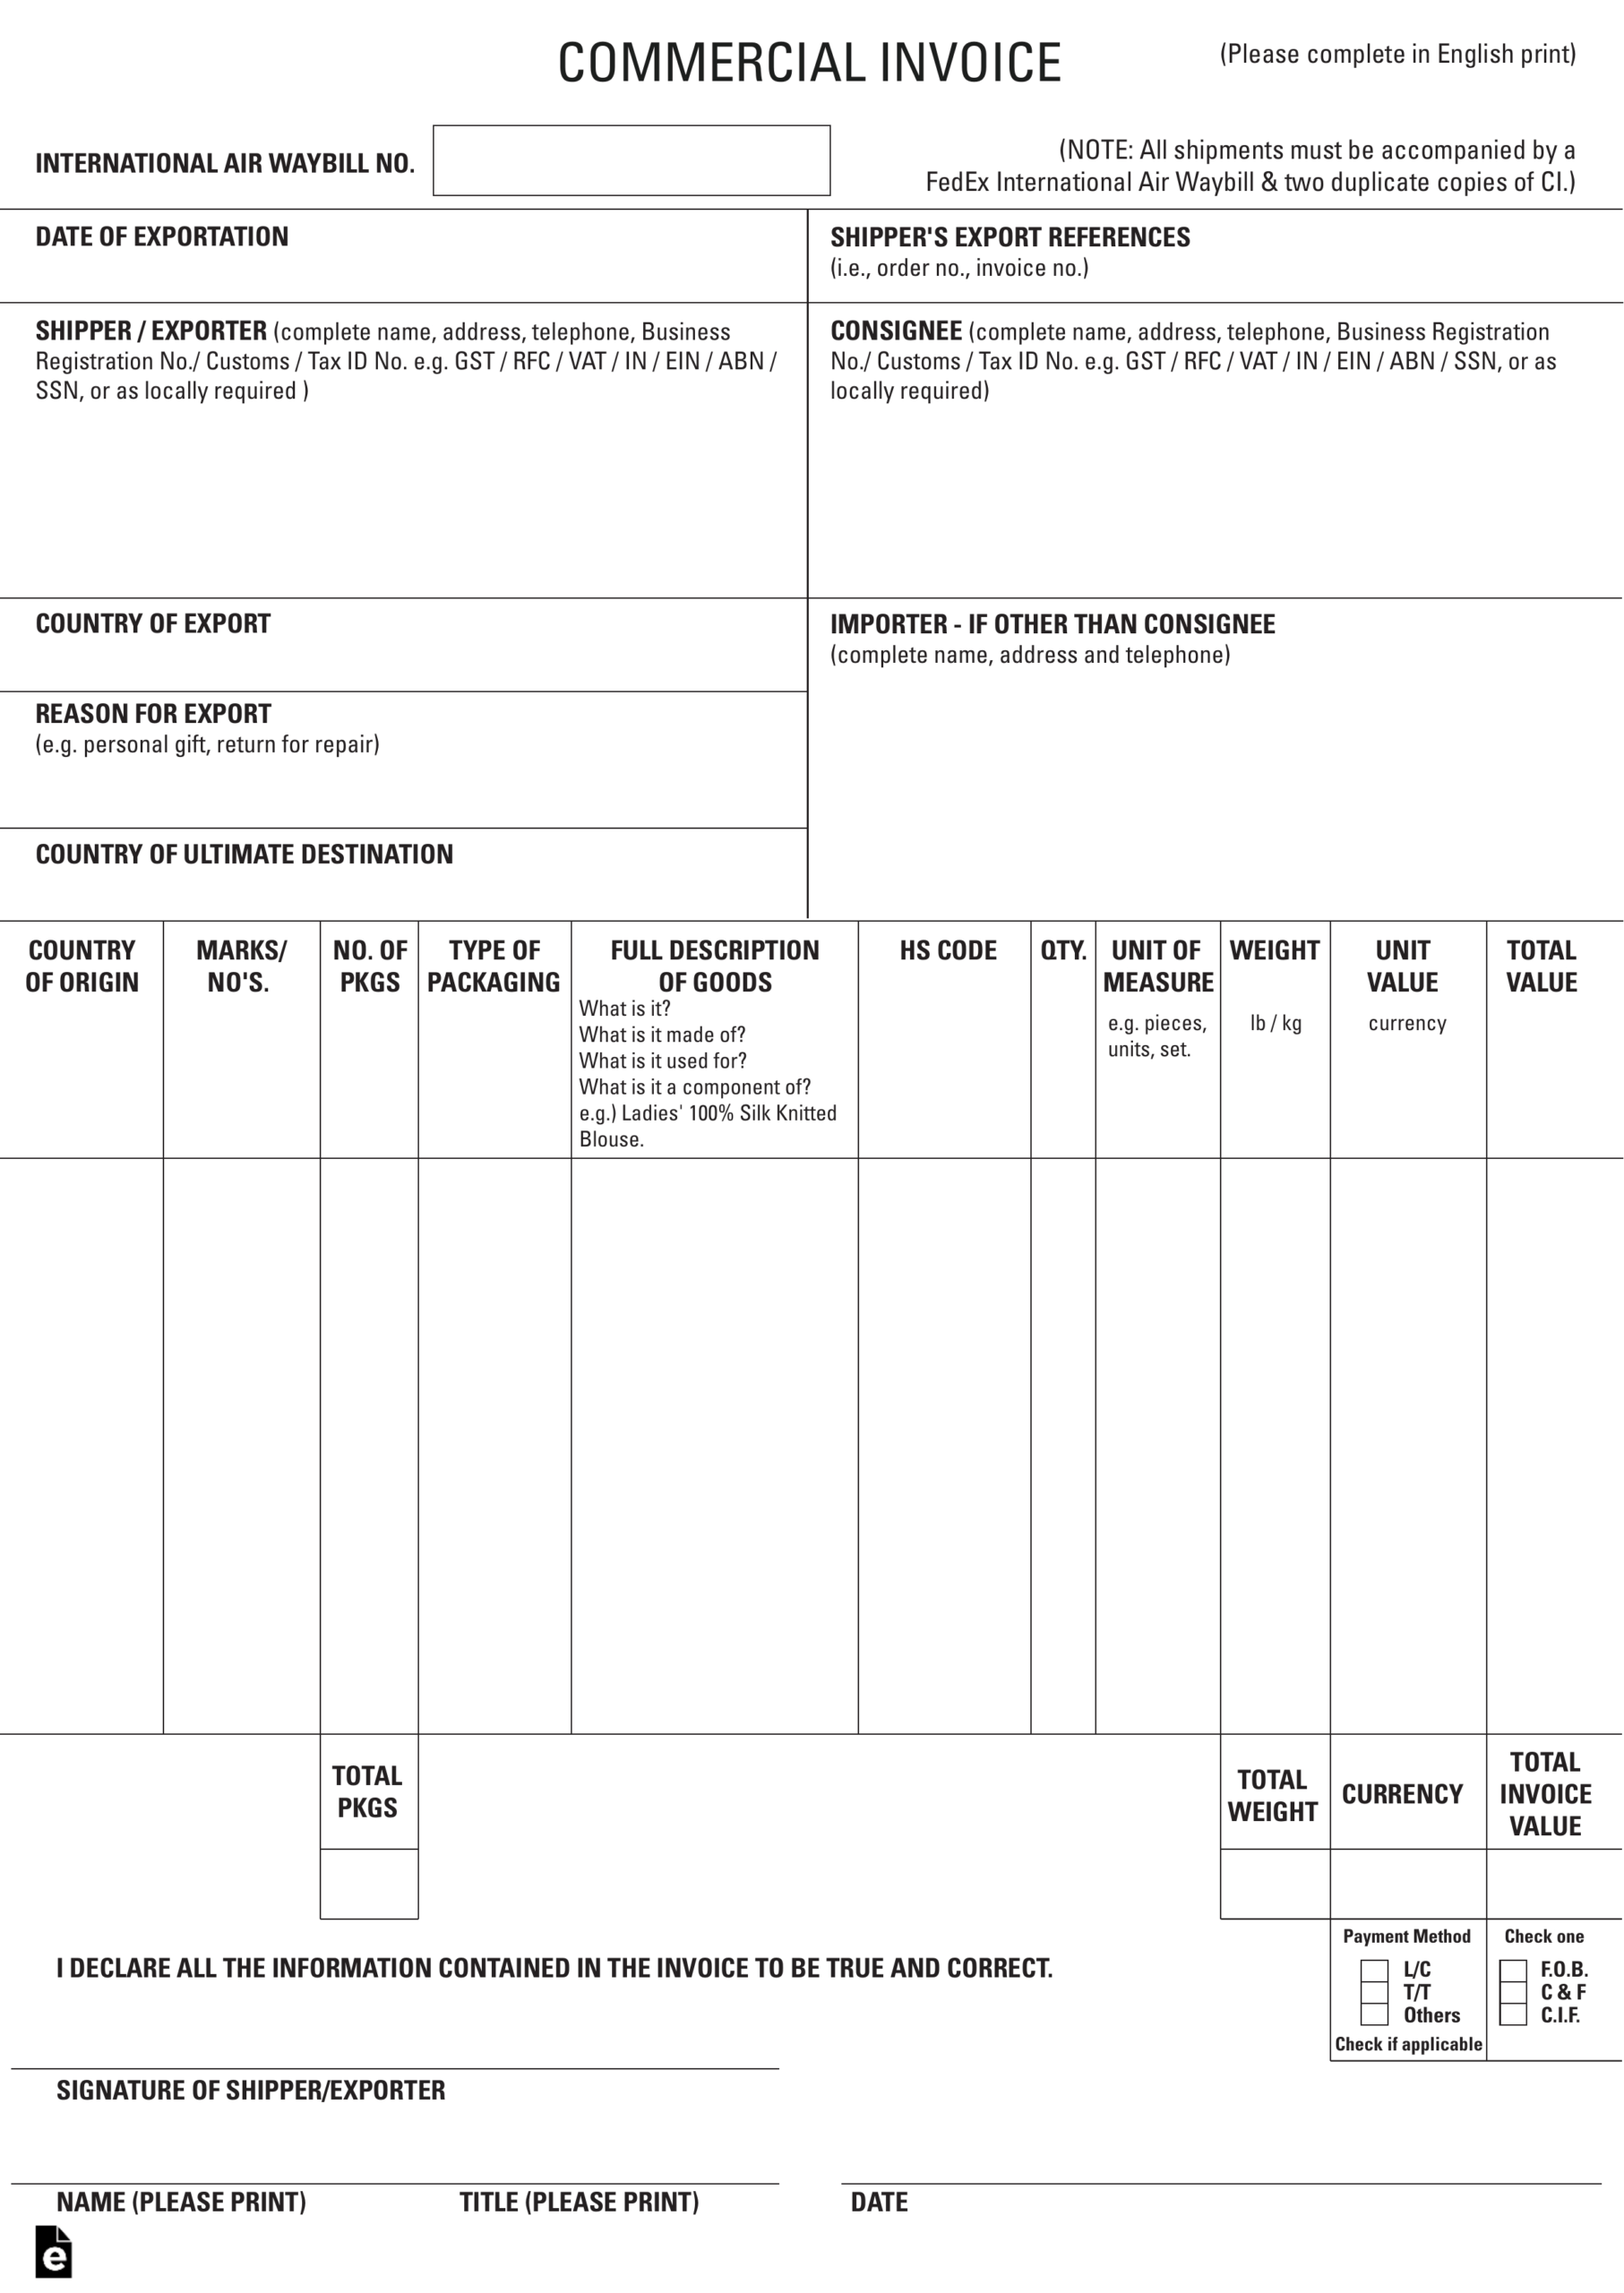 Free International Commercial Invoice Templates - Pdf Inside Commercial Invoice Template Word Doc